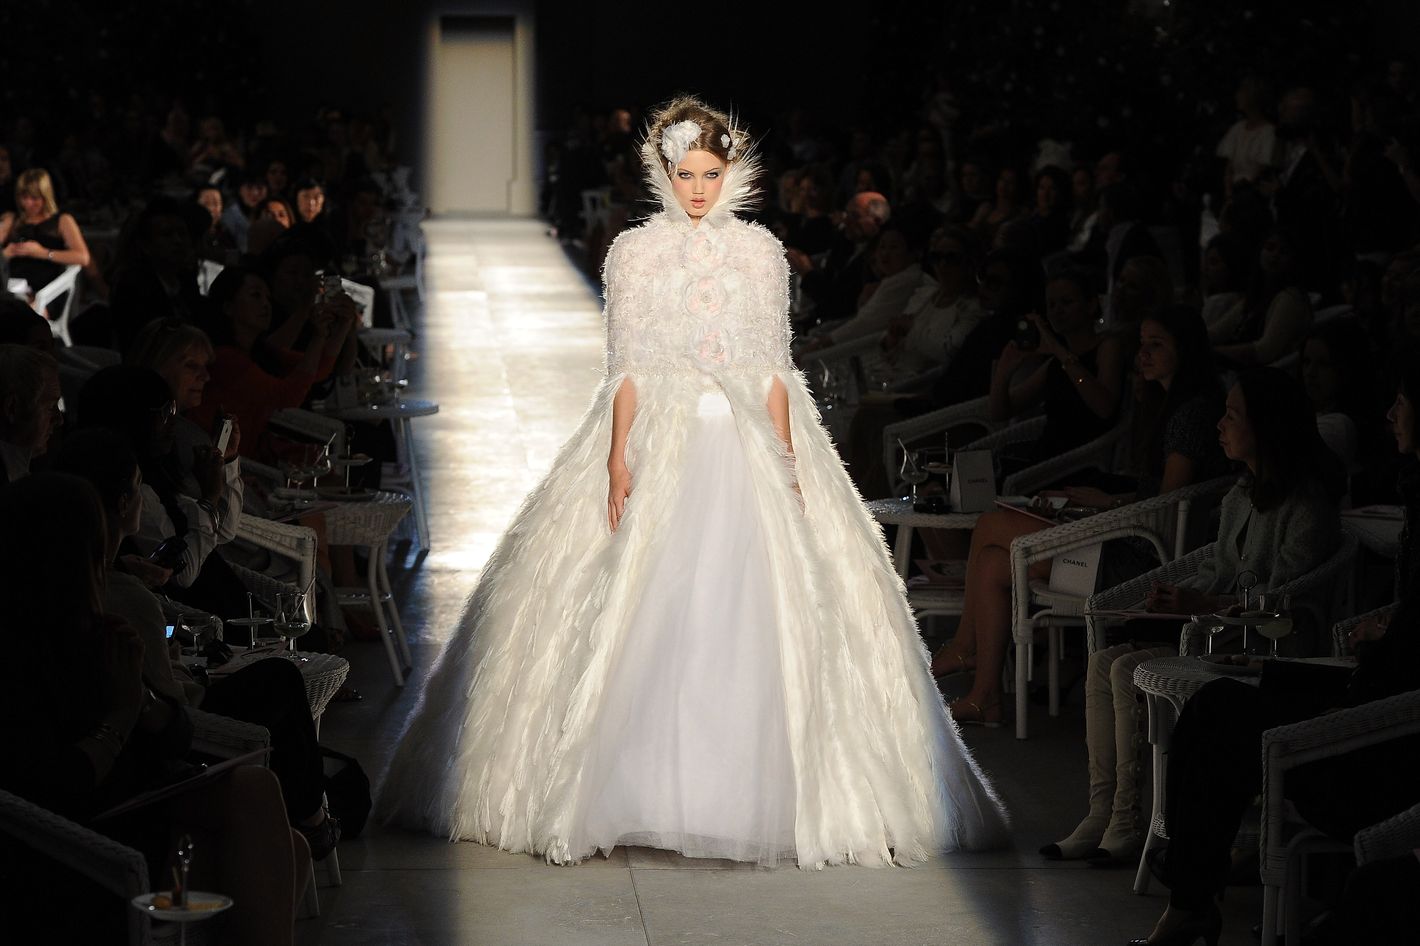 Hot Shot: Lindsey Wixson As Chanel's Haute Couture Bride